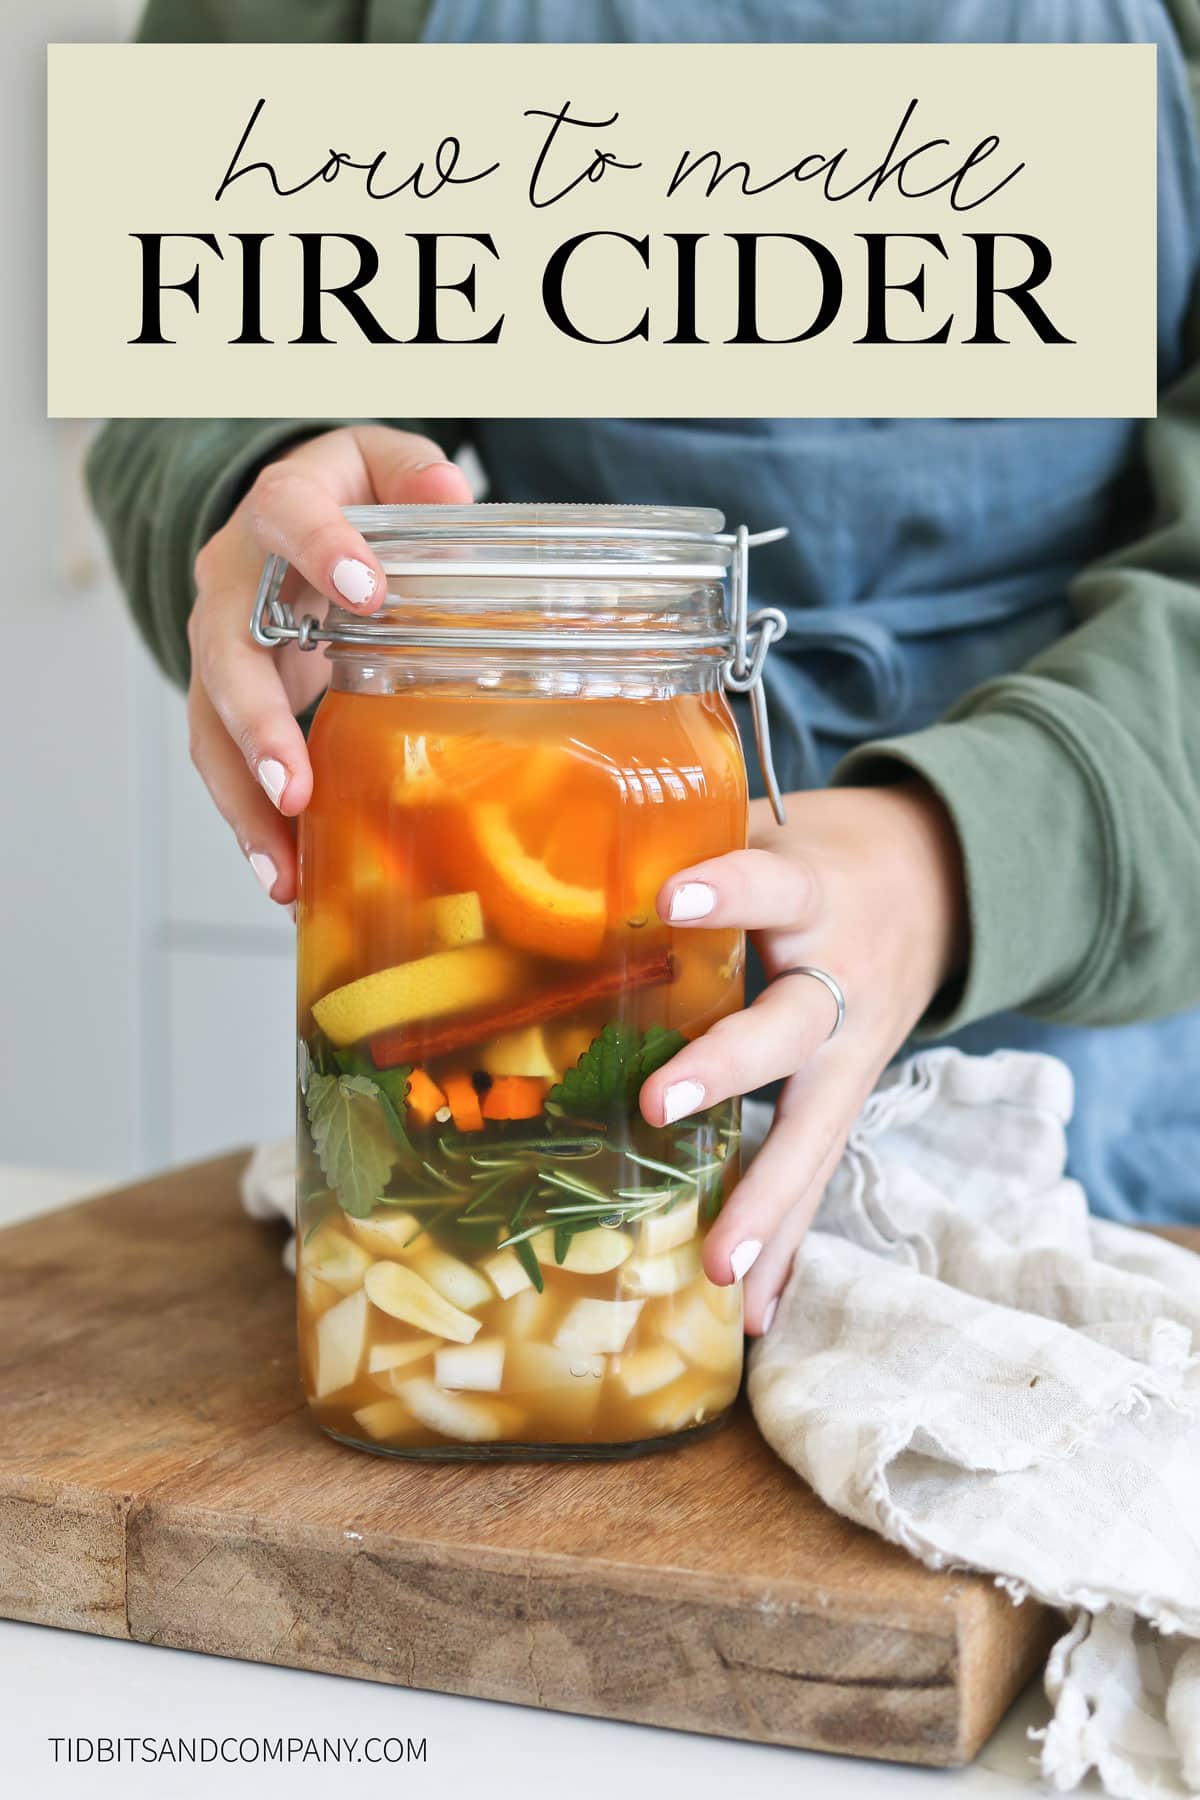 Text of "how to make fire cider" over a picture of fire cider in a jar being held by a girl